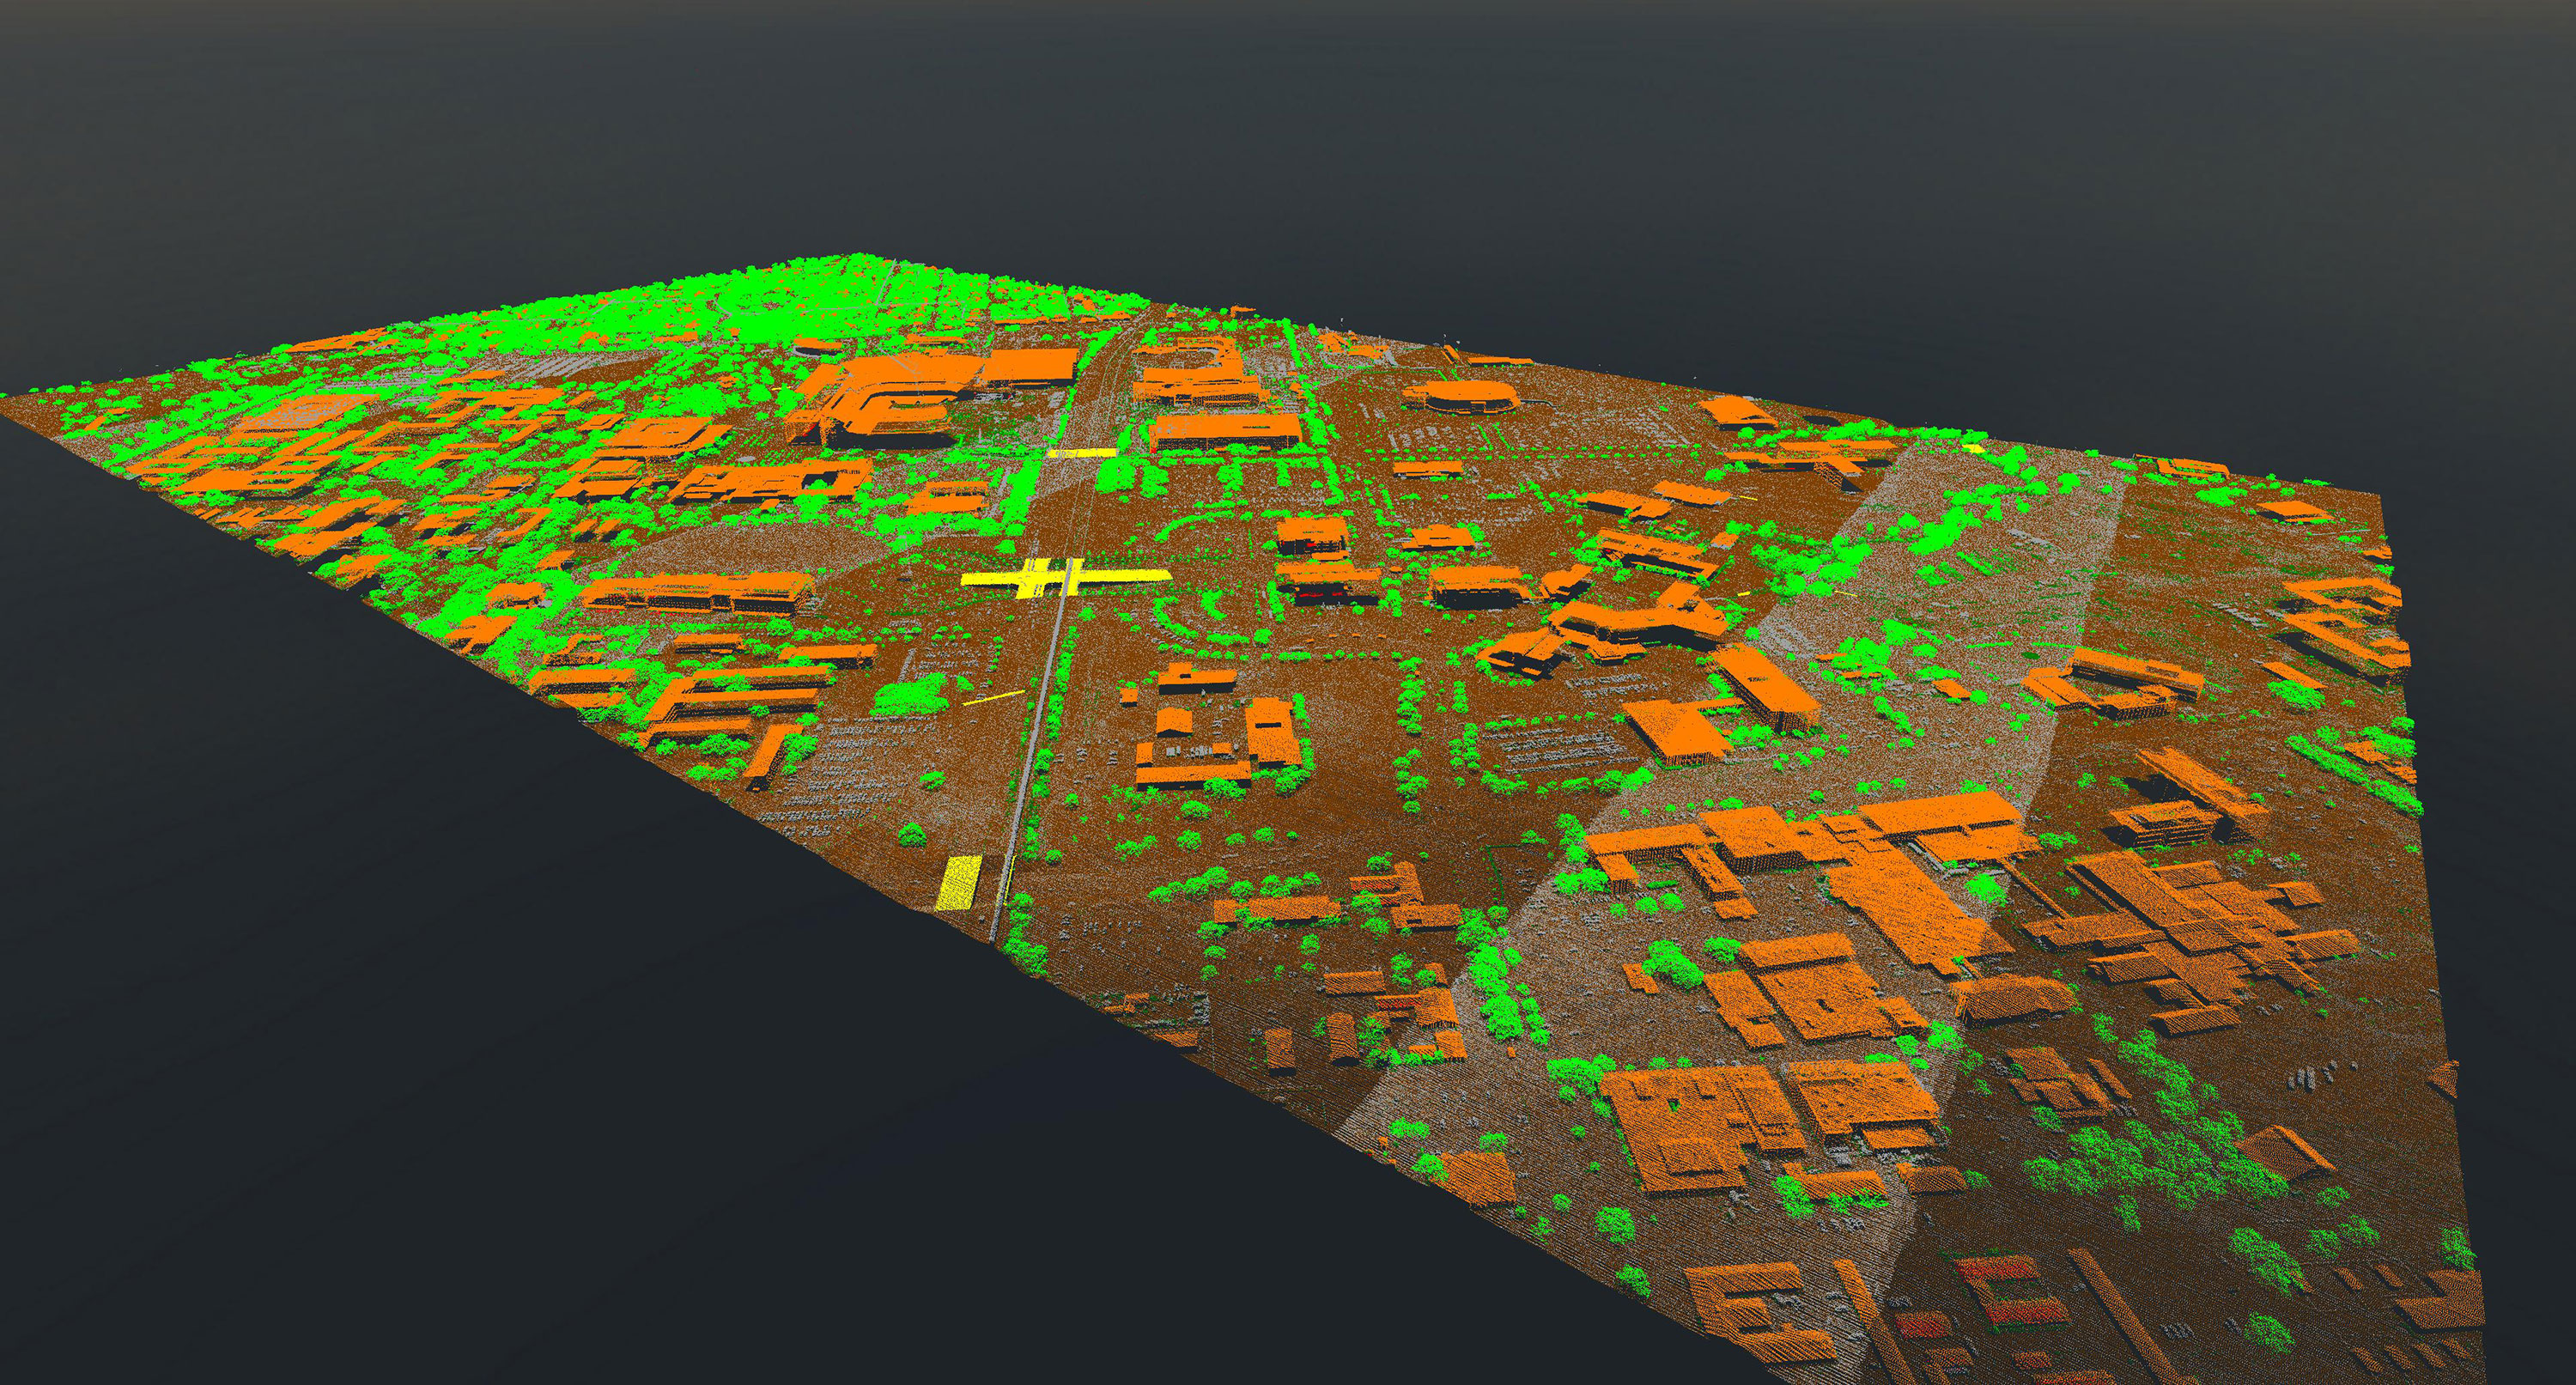 Lidar Point Cloud of College Station Texas